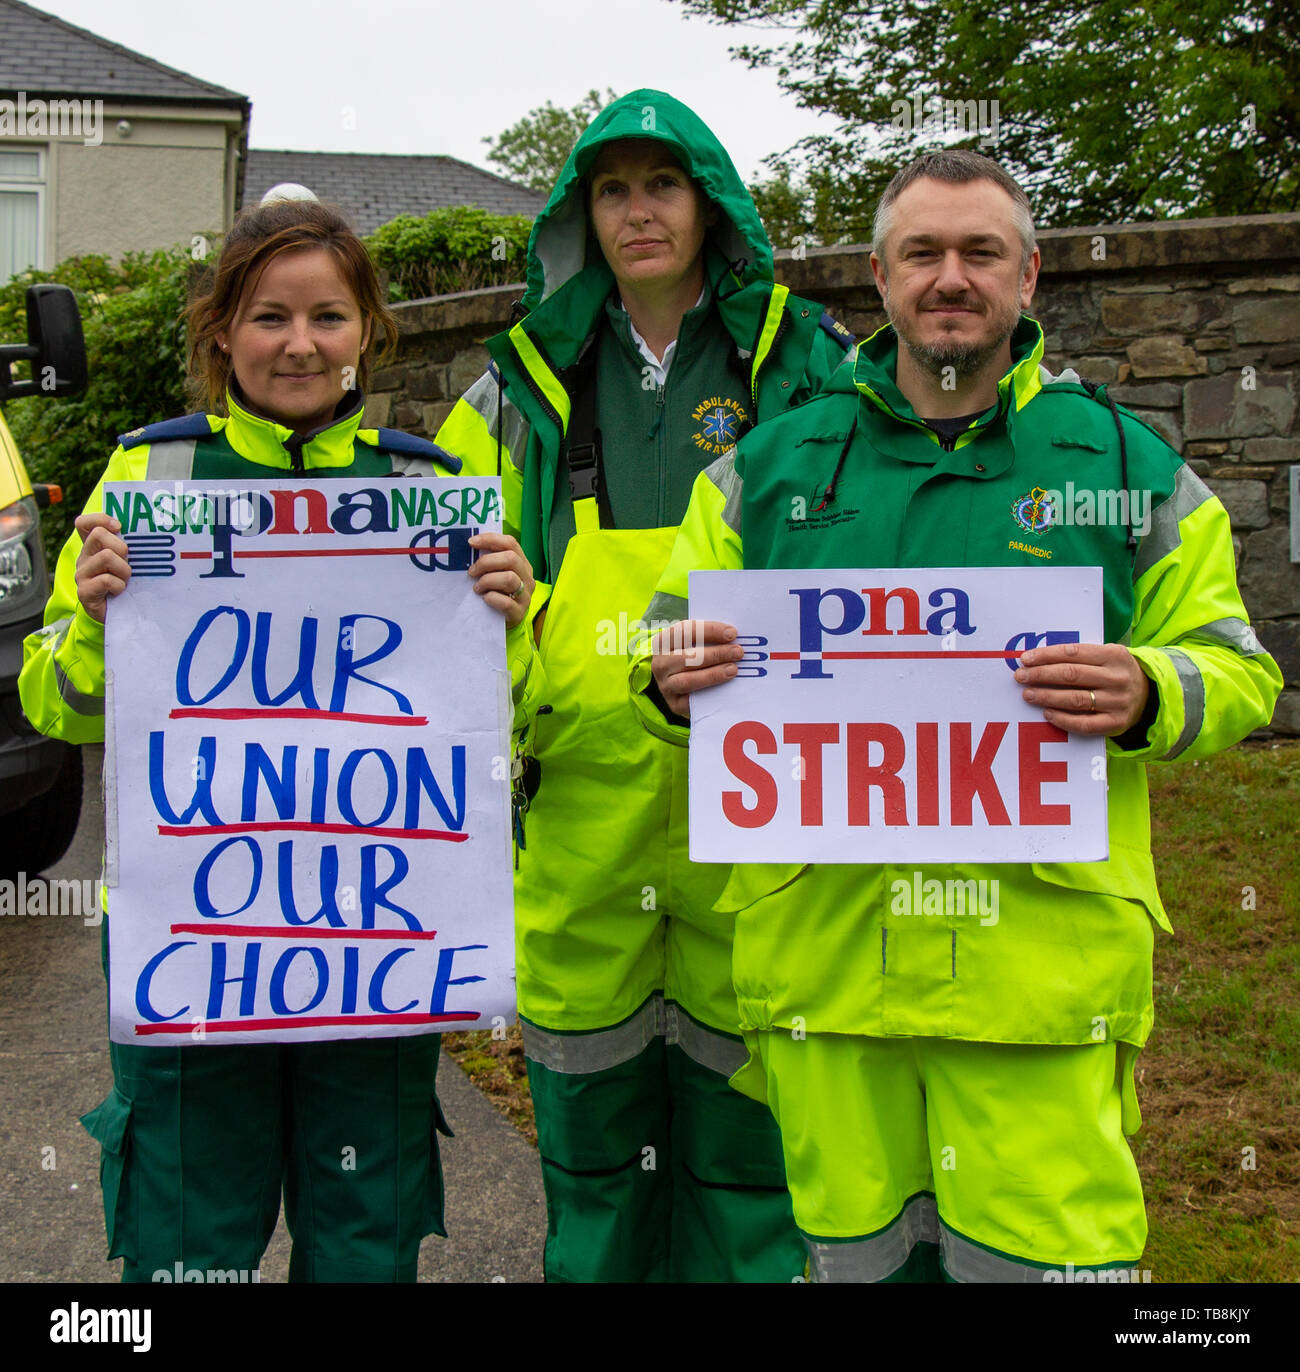 Ambulance Crews on strike, Skibbereen, West Cork, Ireland, 31st May 2019, Skibbereen Ambulance Crews on Strike.  May 31st 2019. Anne Leonard, Jason Kelly, and Sorcha Hayes of the Skibbereen Paramedics were manning the picket lines outside Skibbereen Community Hospital today as part of the NASRA, National Ambulance Service Representative Association national day of action.  Credit aphperspective/ Alamy Live News Stock Photo